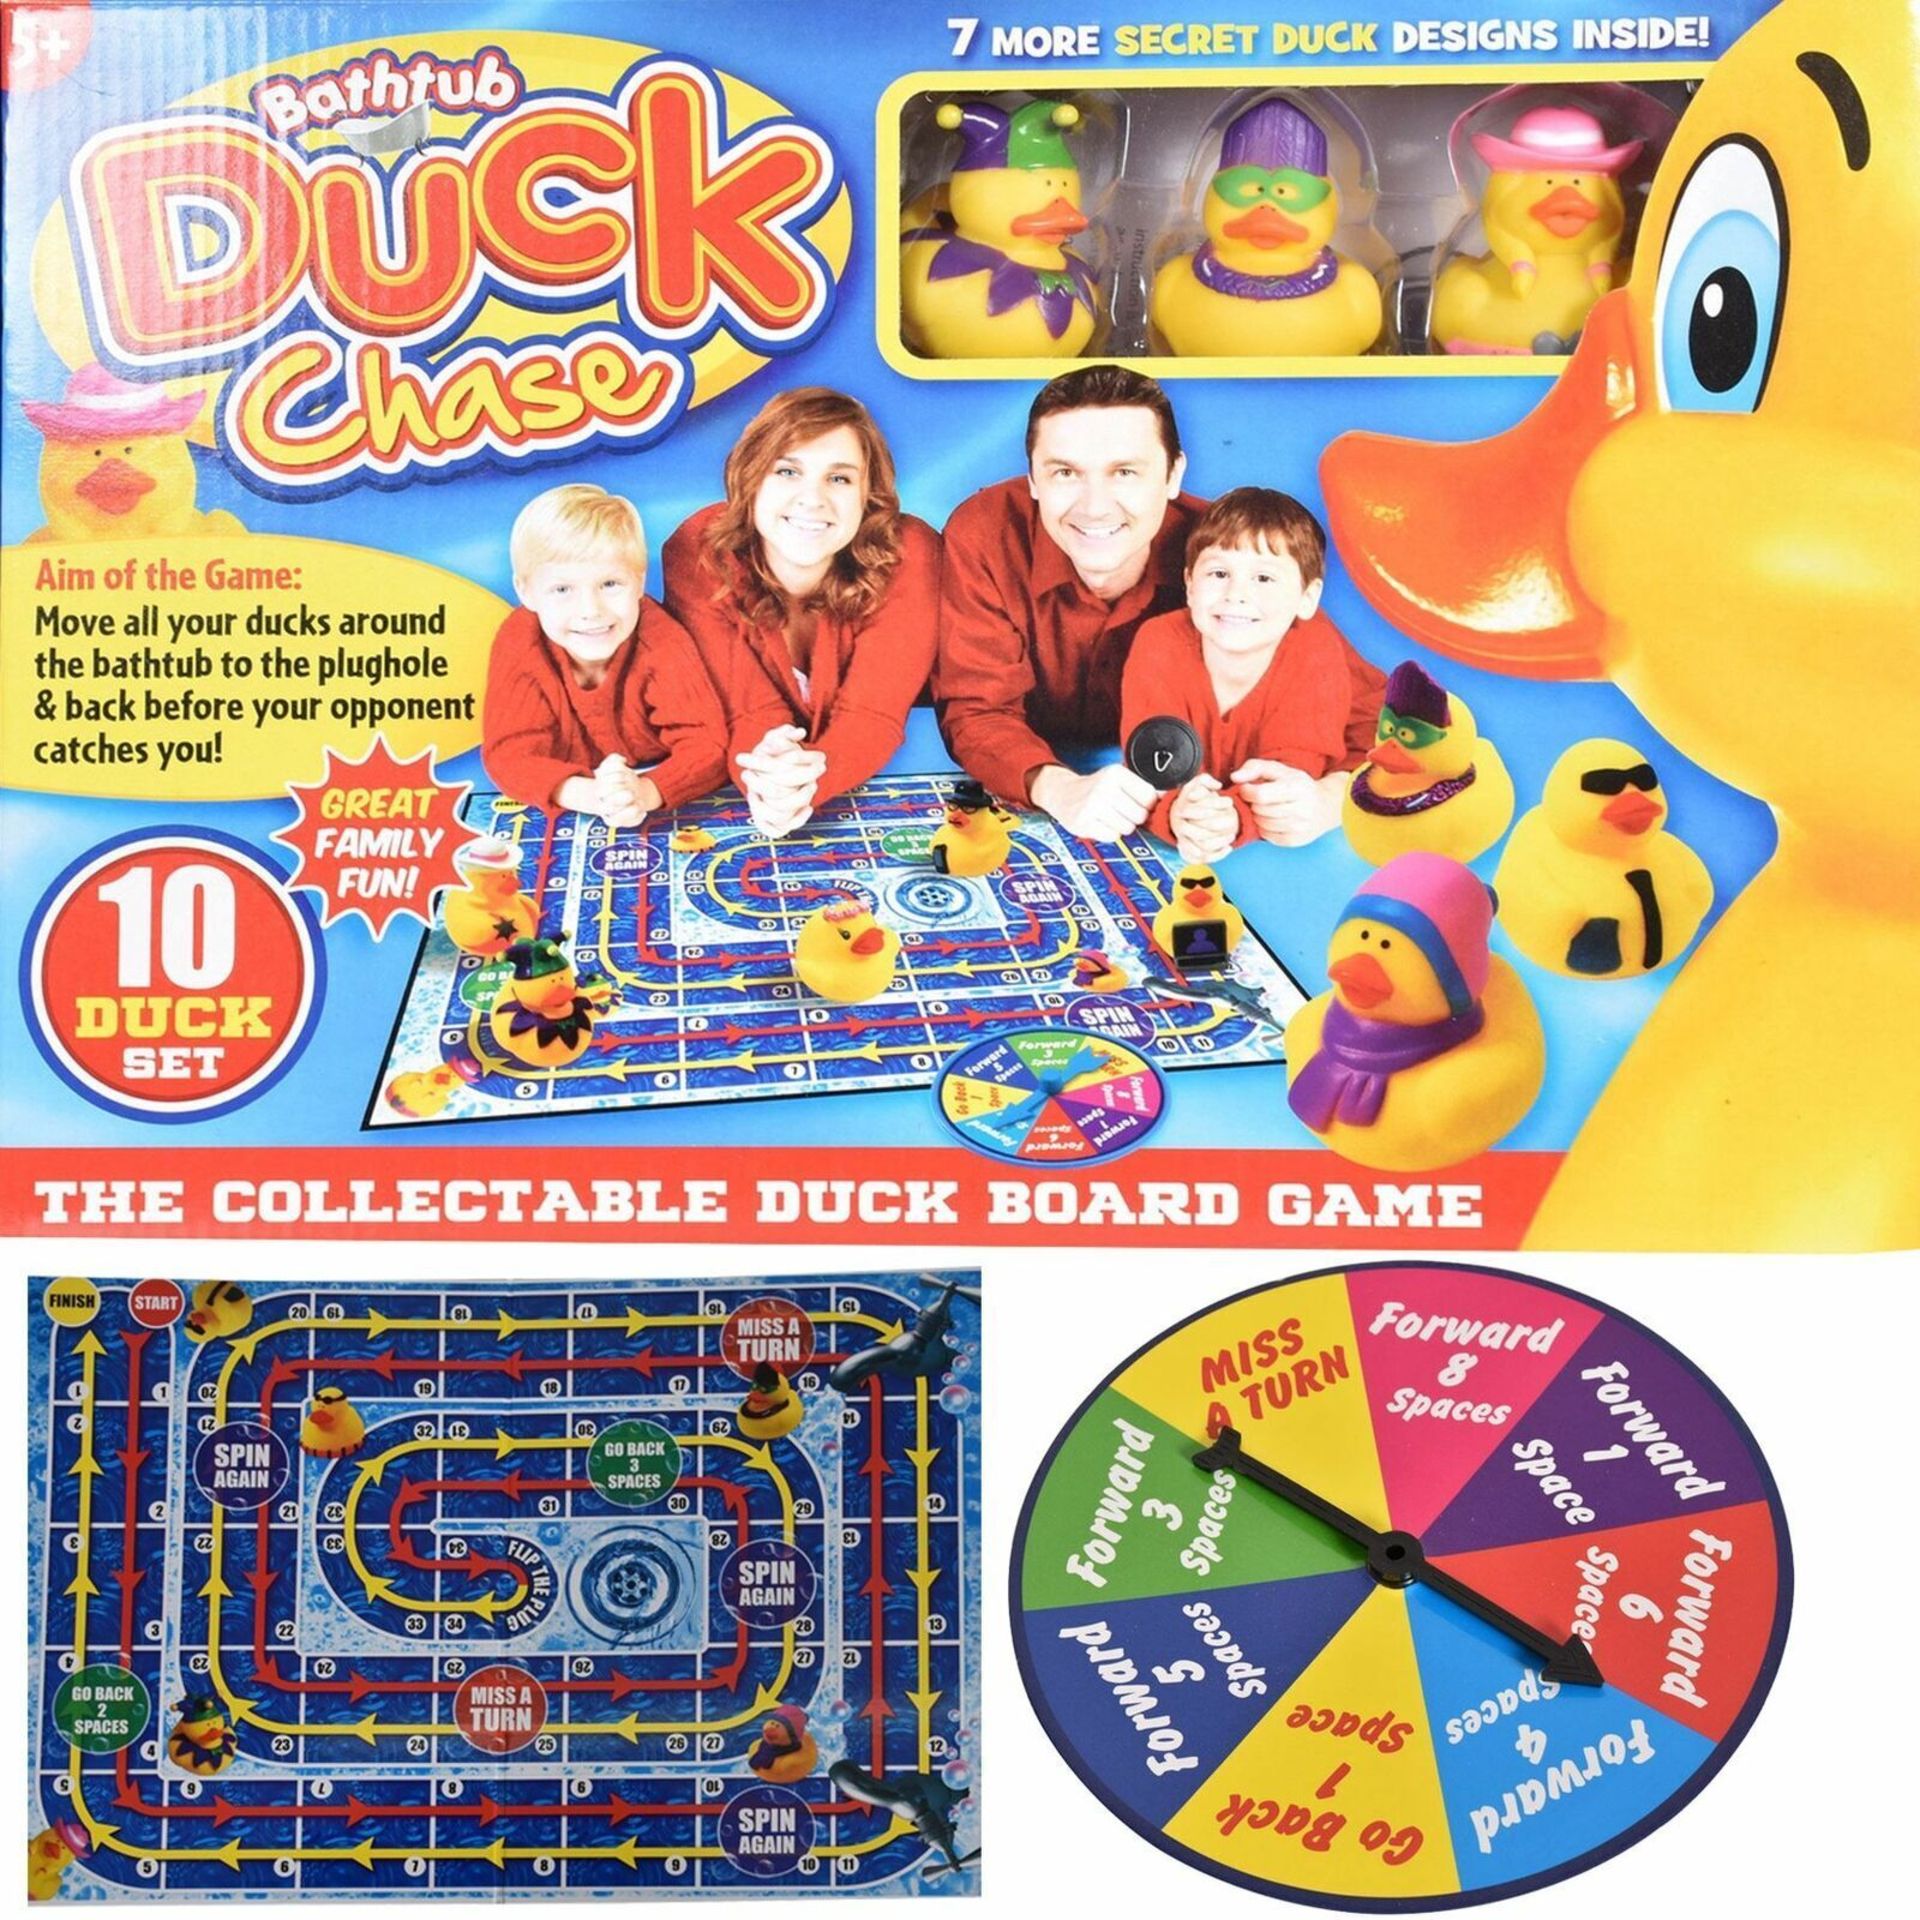 50pcs Brand new Chase a duck set game - new and sealed original rrp £14.99 - 100 pcs in lot